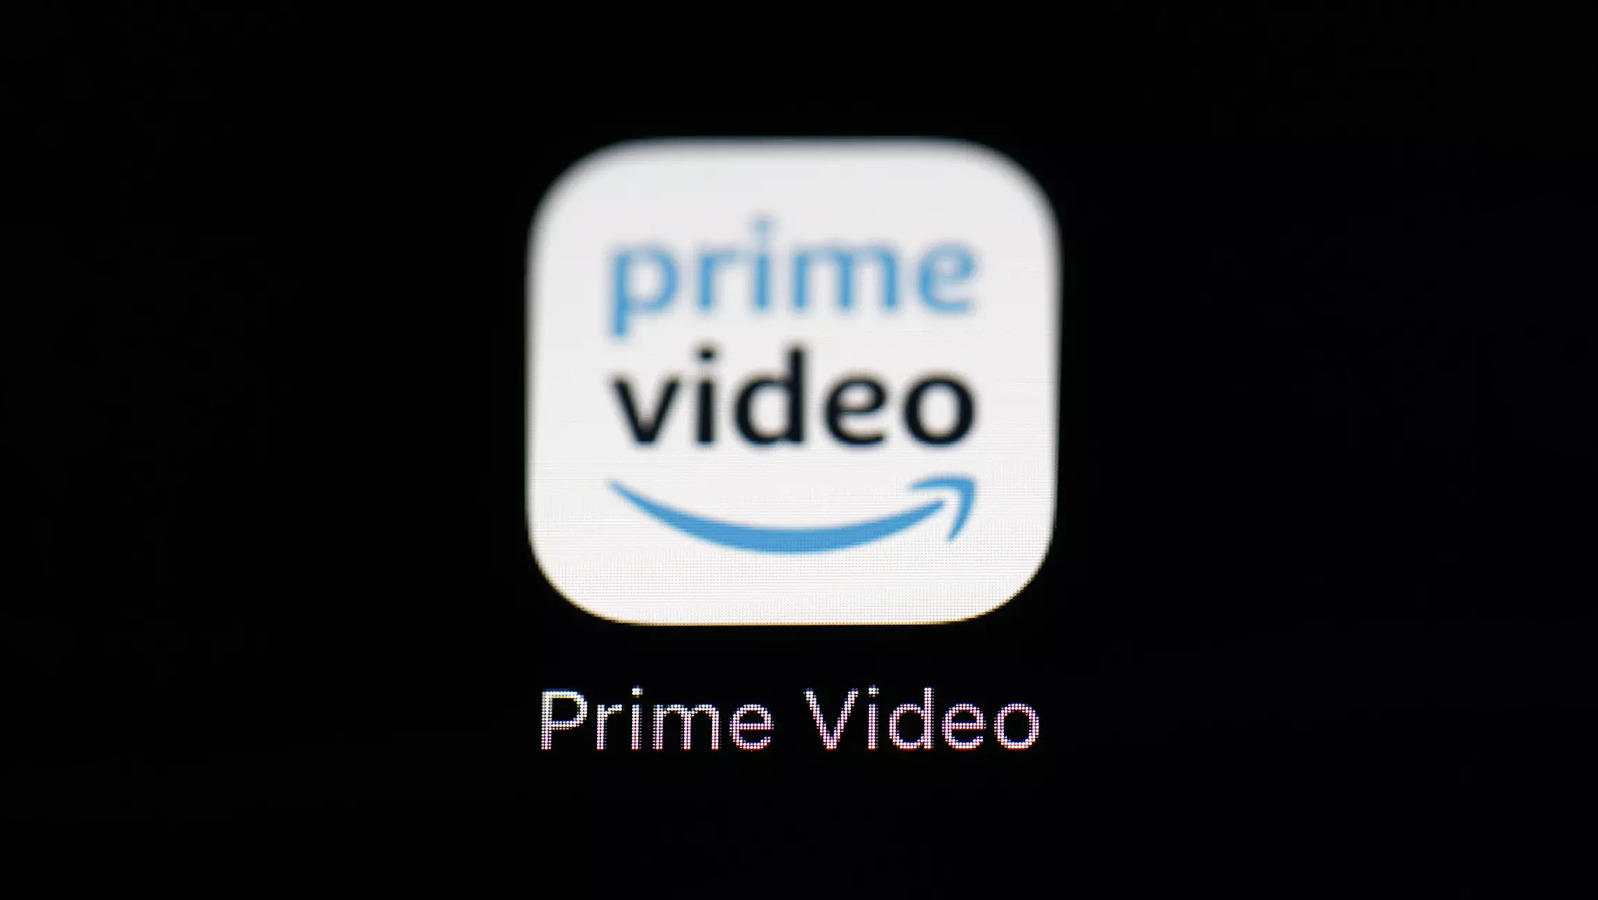 Prime Video Launches Watch Party in India 